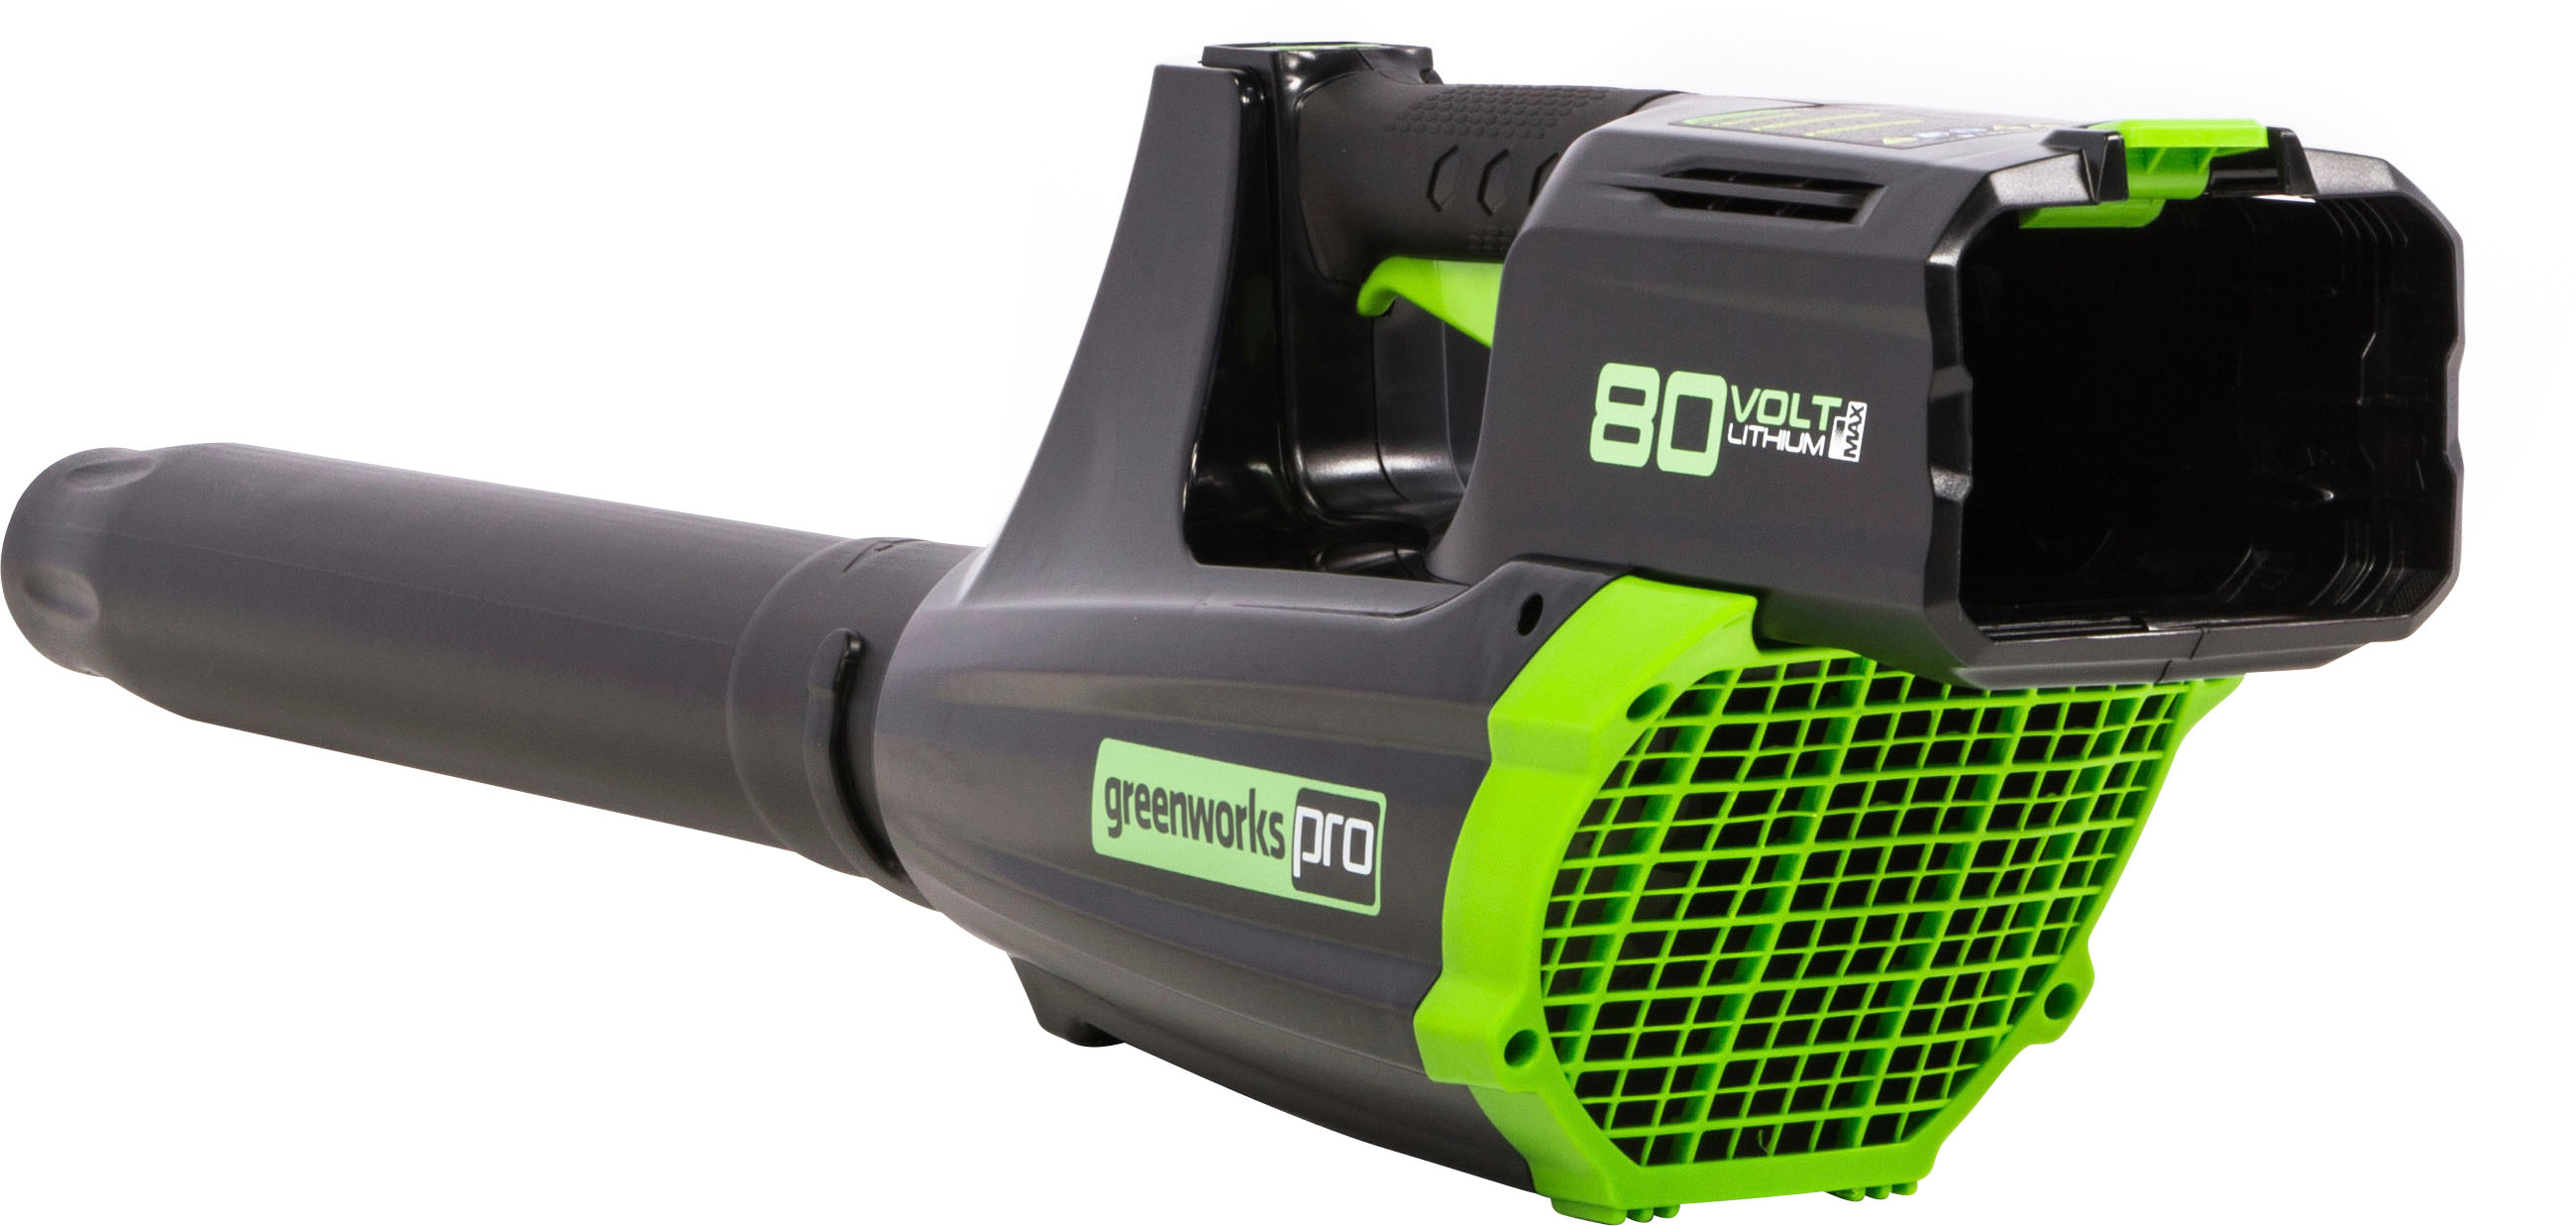 Angle View: Greenworks - 80-Volt Cordless 16" String Trimer and 125 MPH 500CFM Blower Combo Kit (2.0Ah Battery and Charger Included) - Green